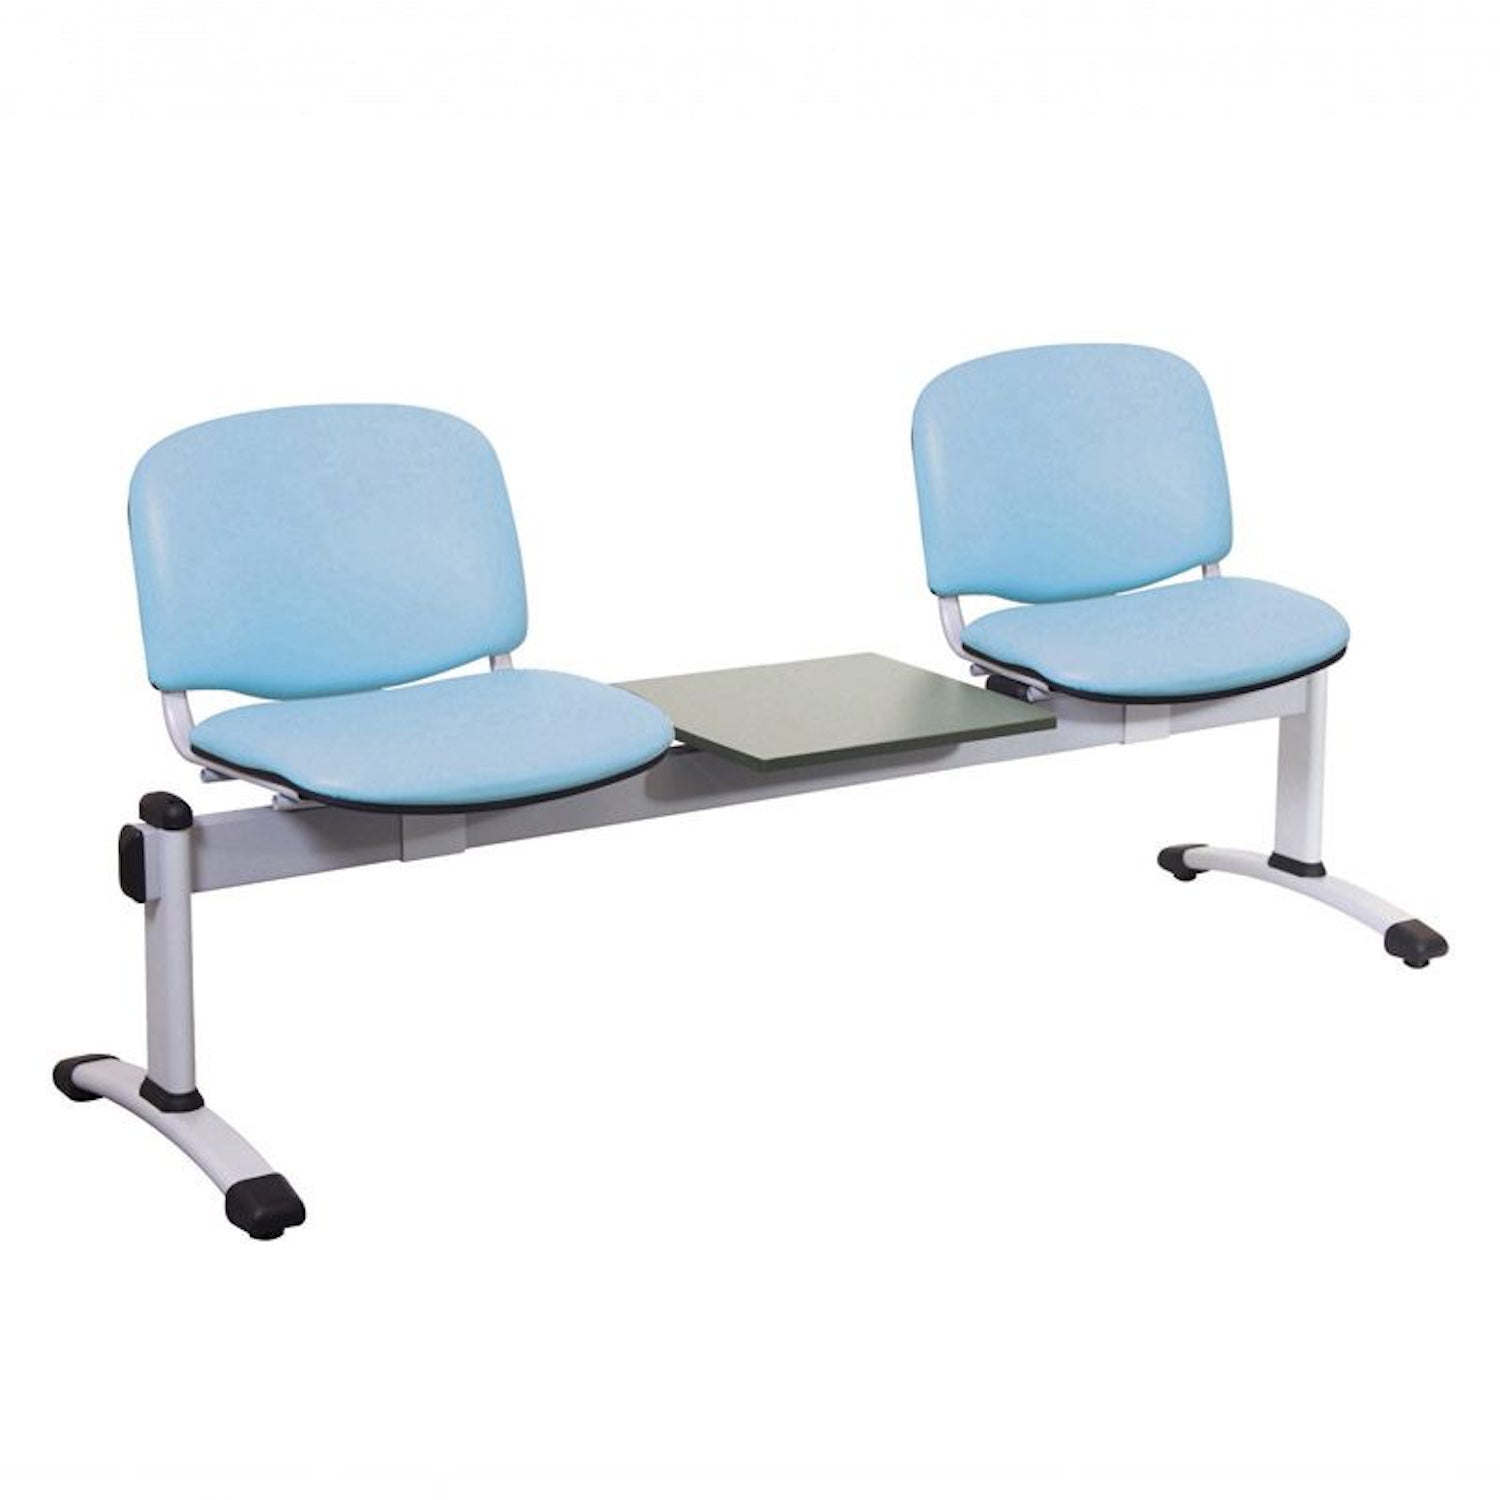 Sunflower Visitor 2 Anti-bacterial Vinyl Upholstery Seats & 1 Table Module in Cool Blue